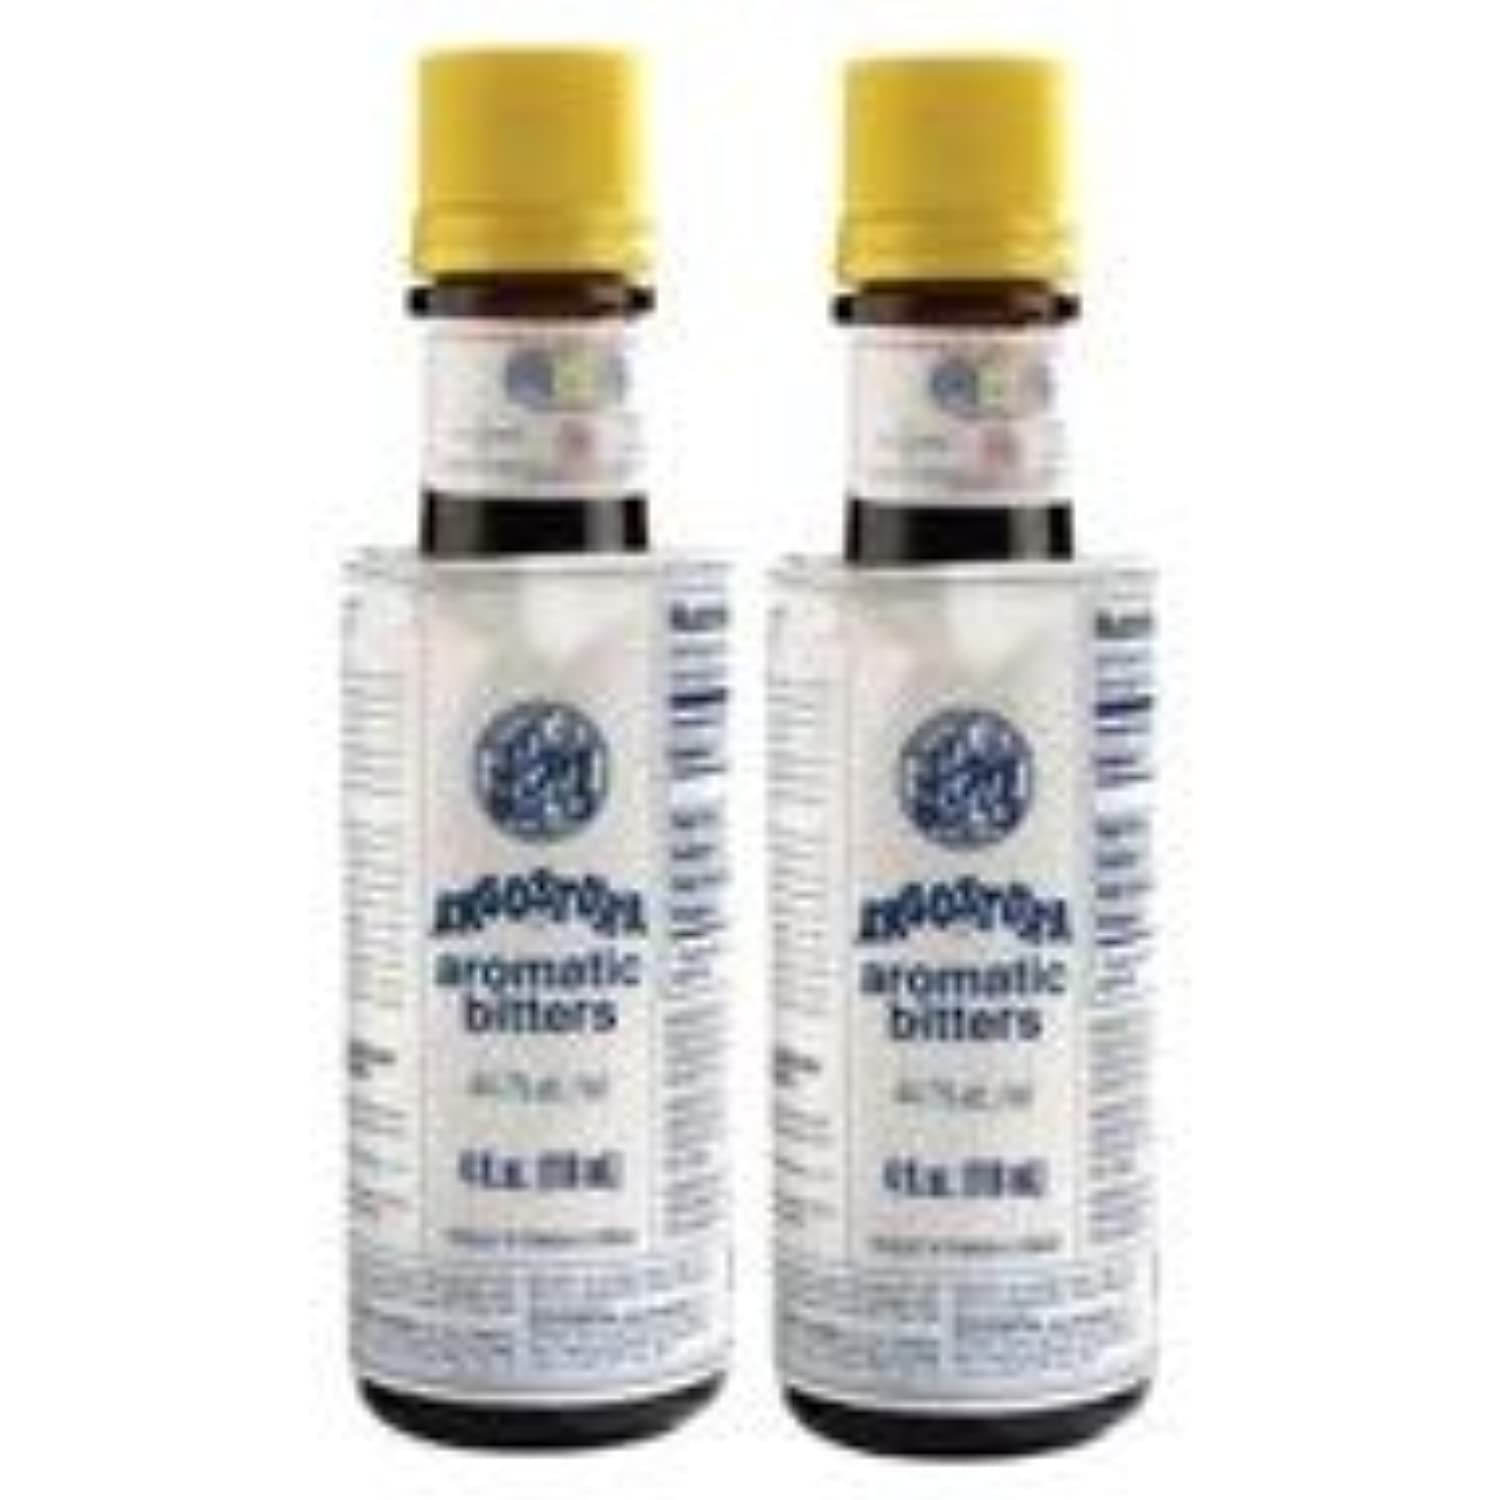 Angostura Aromatic Bitters, 4 Fl Oz, 2 Count (Pack of 2) - image 2 of 3